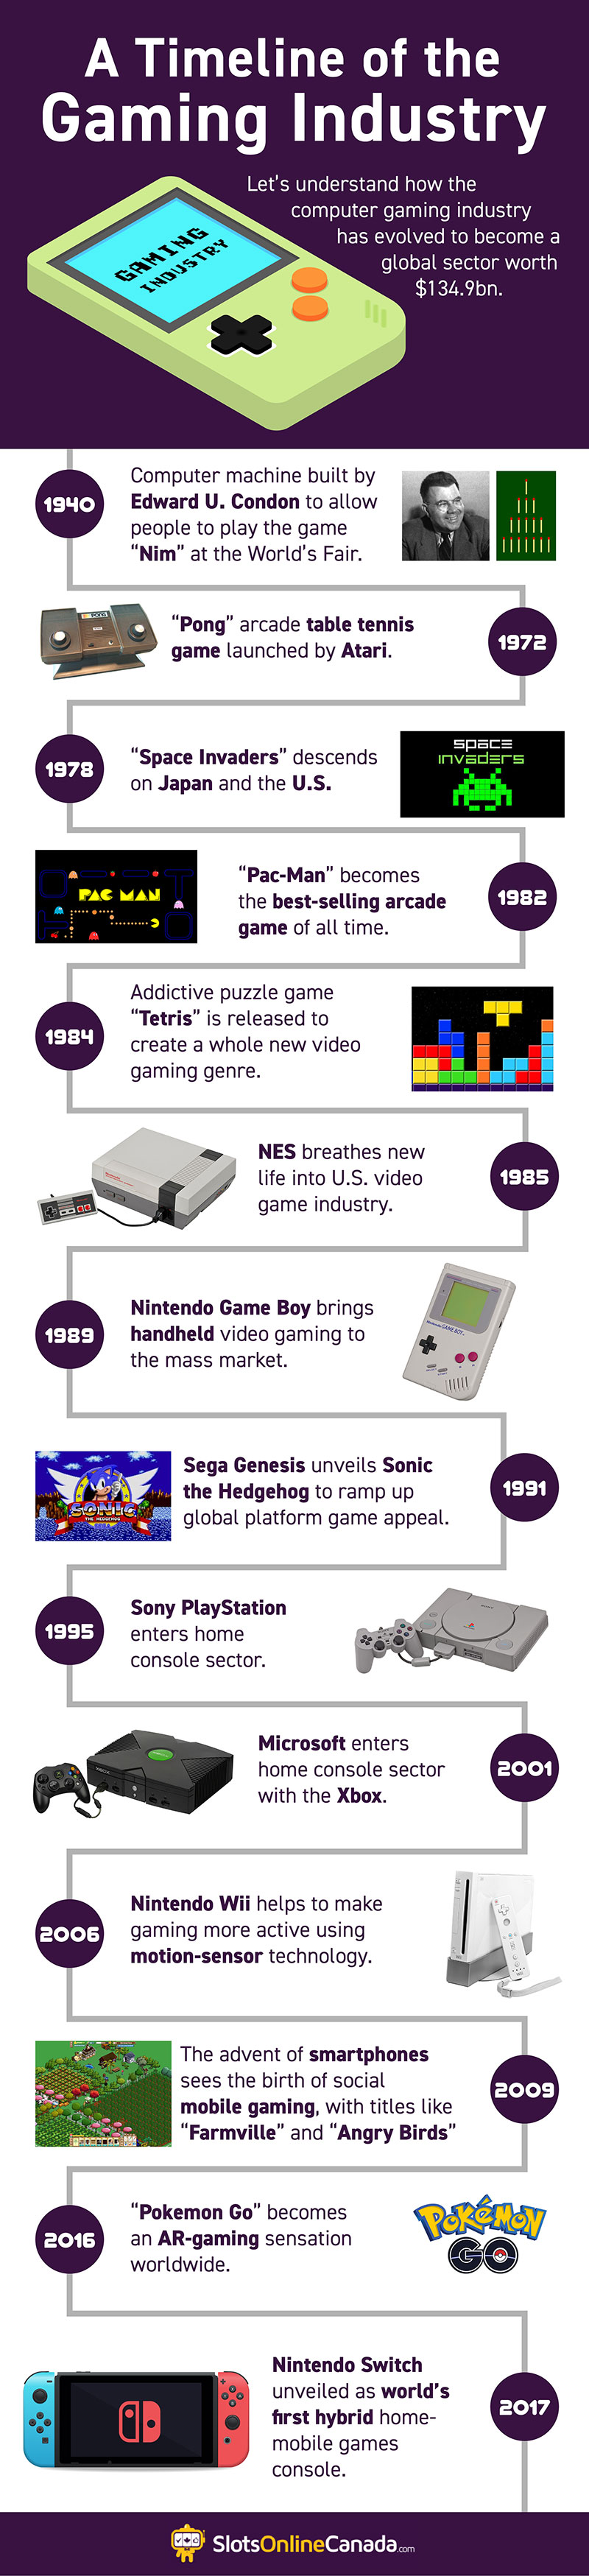 Timeline of the video gaming industry